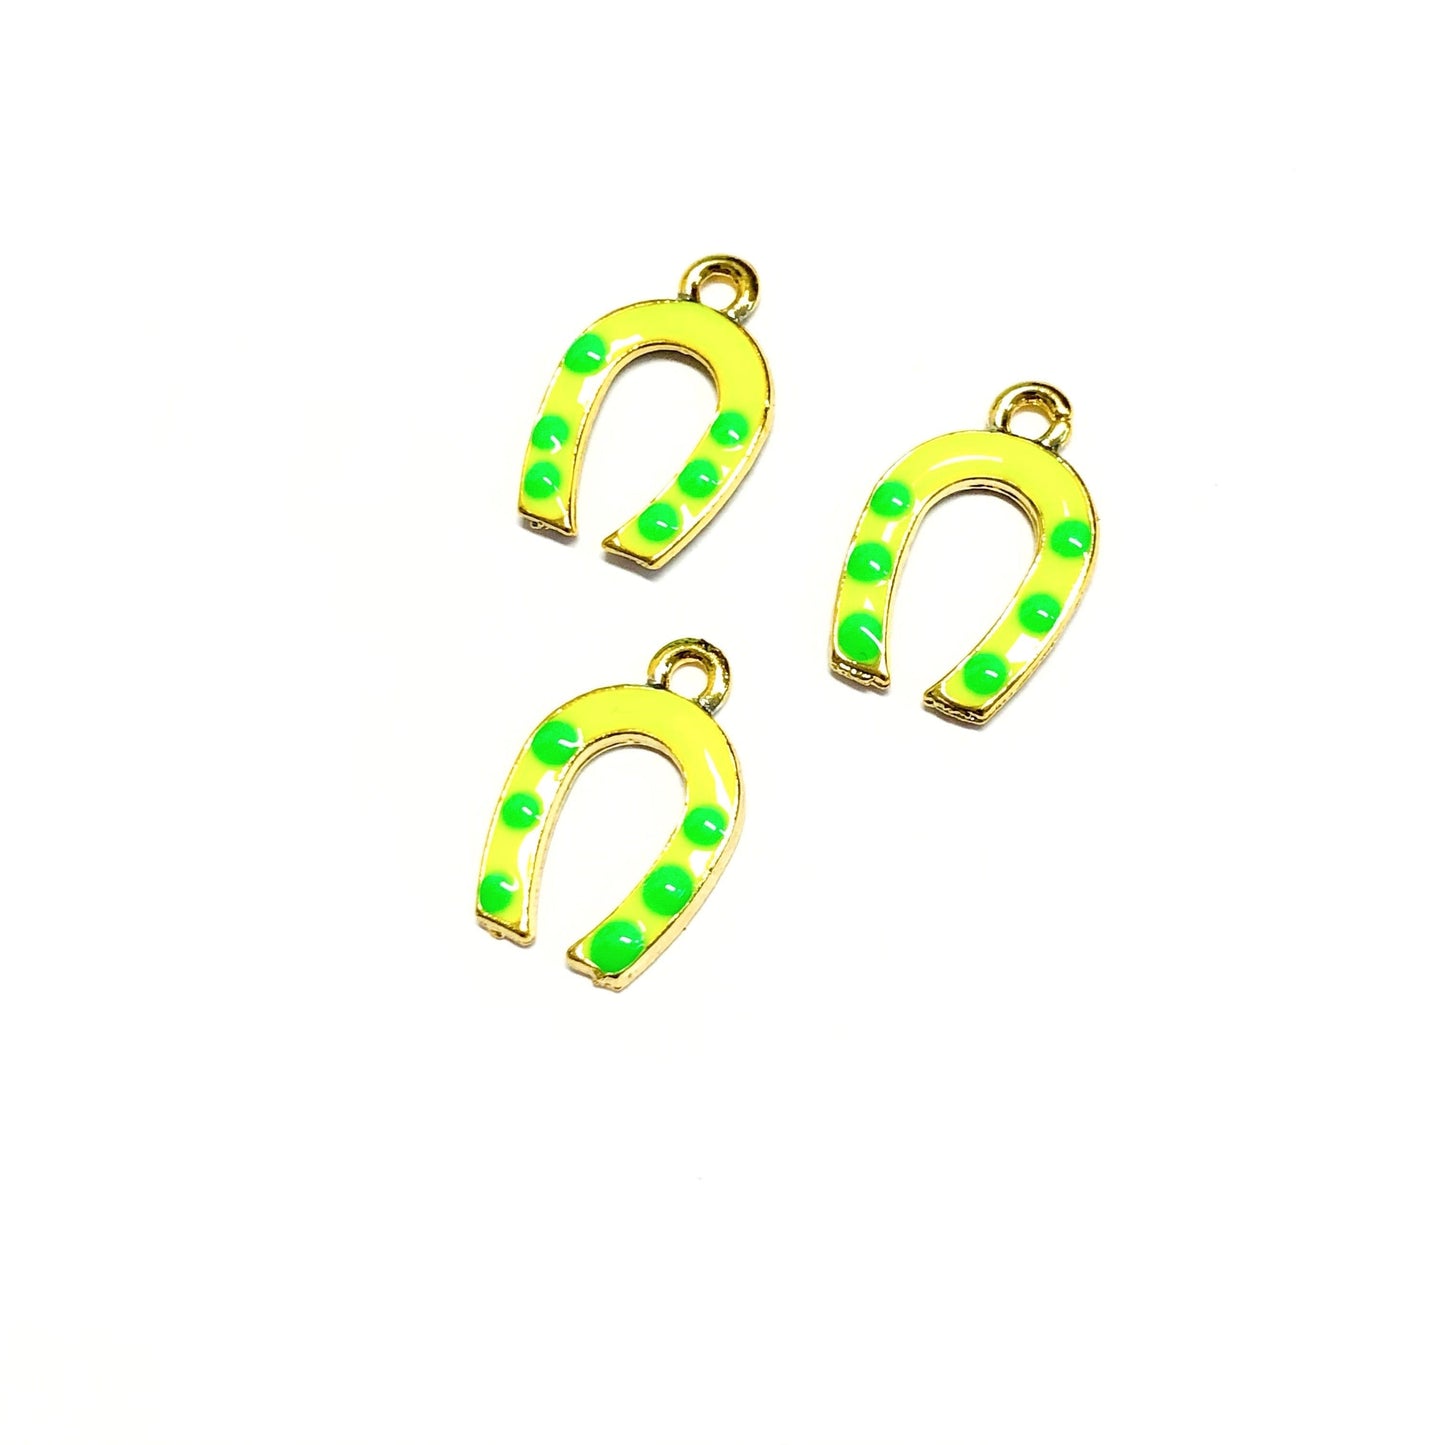 Gold Plated Enamel Horseshoe Shaking Attachment - Neon Yellow, Green